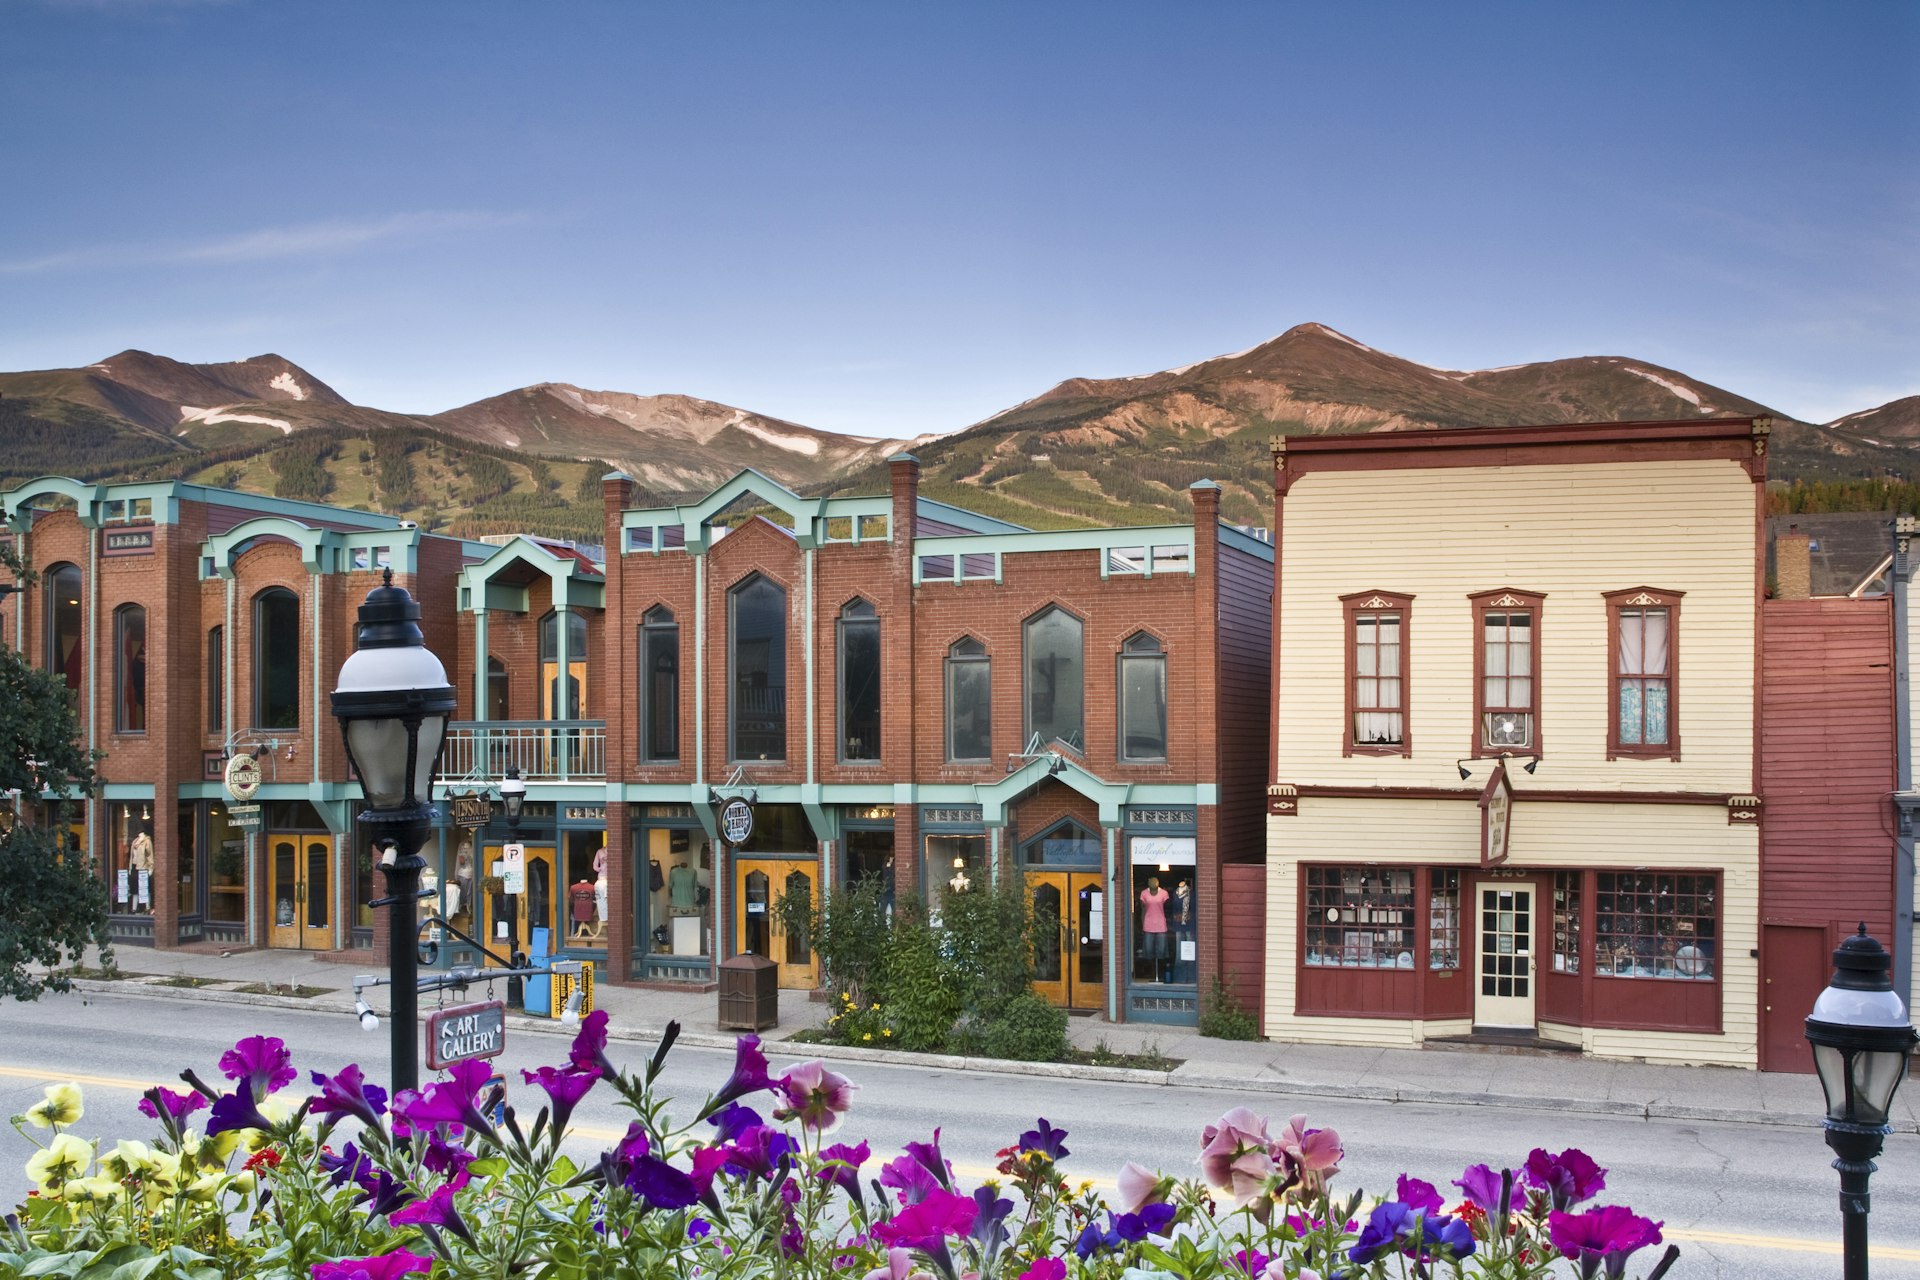 The brick buildings of Main Street, Breckenridge, with wildflowers in the foreground and mountains in the background